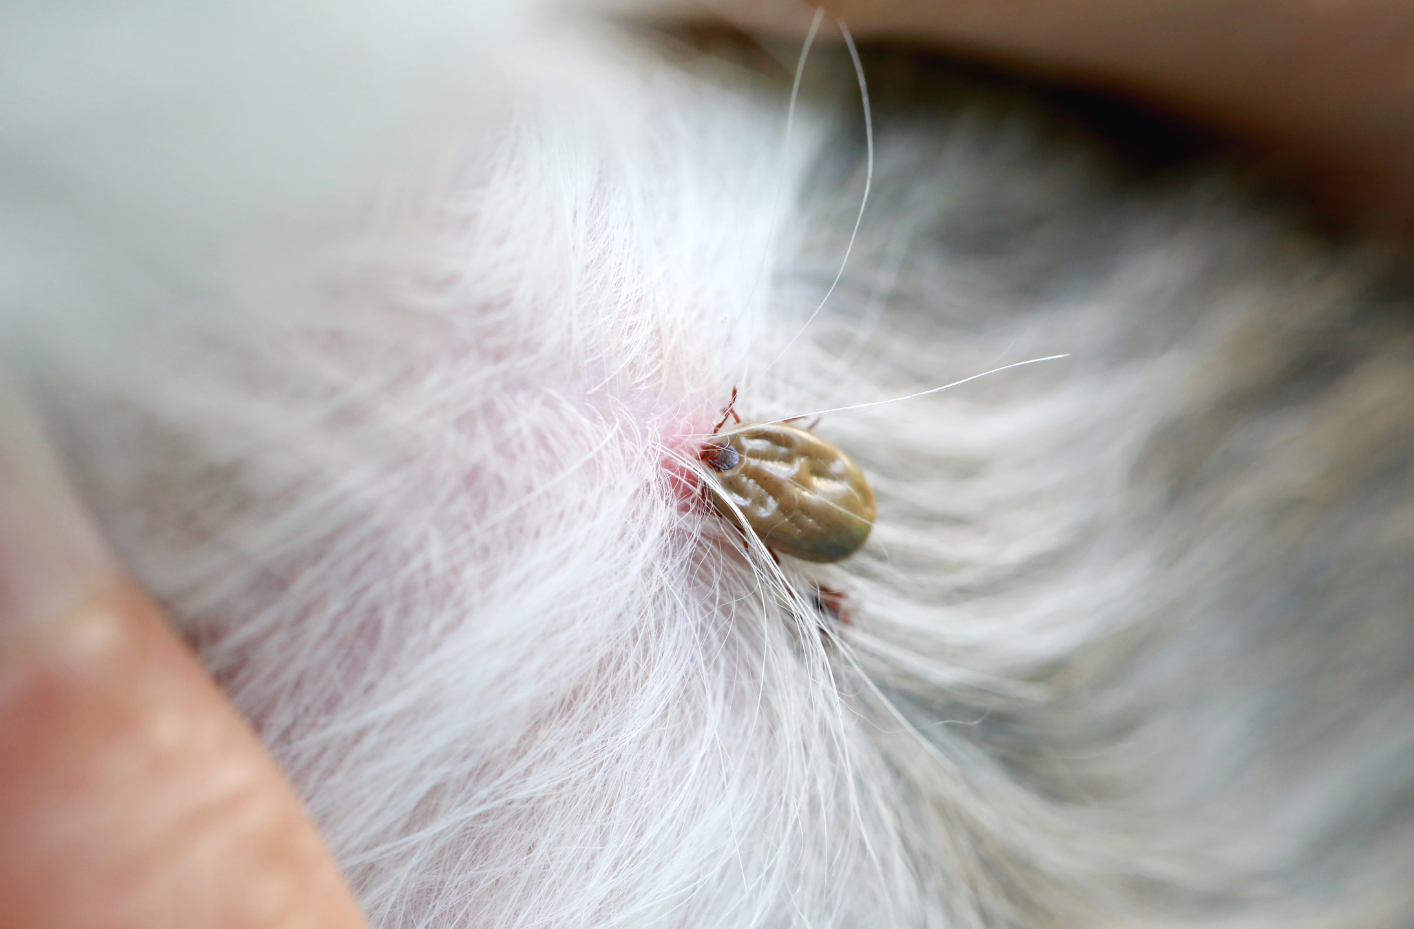 Checking your pets for ticks - Masterclip